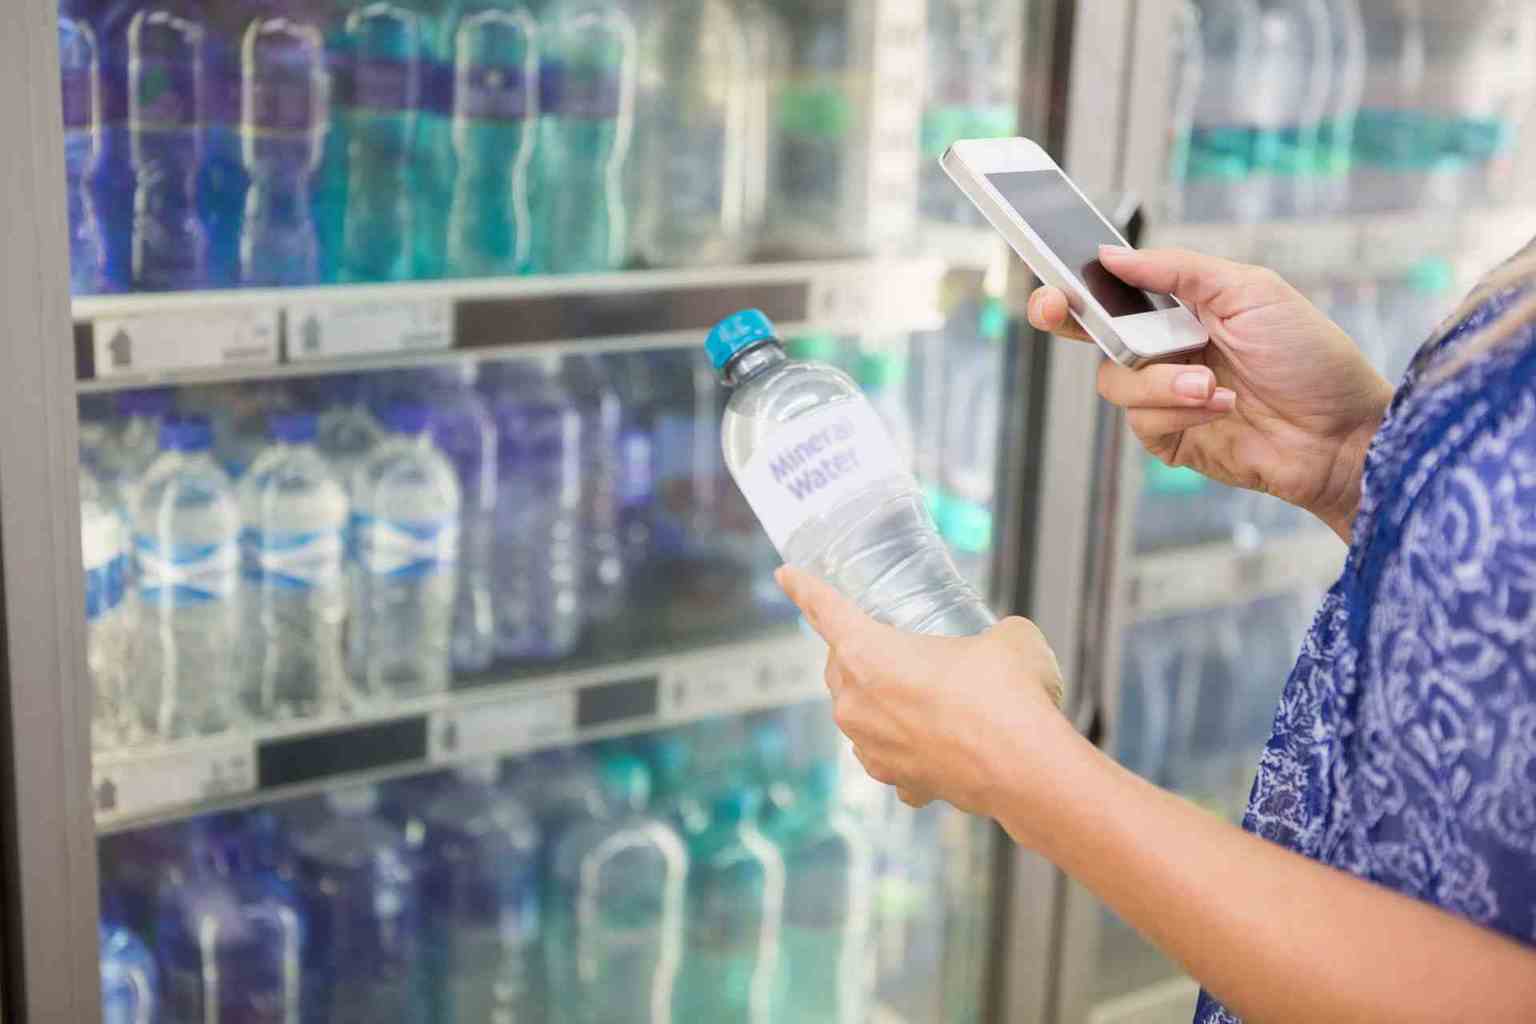 How to Find Retailers for Water Bottles